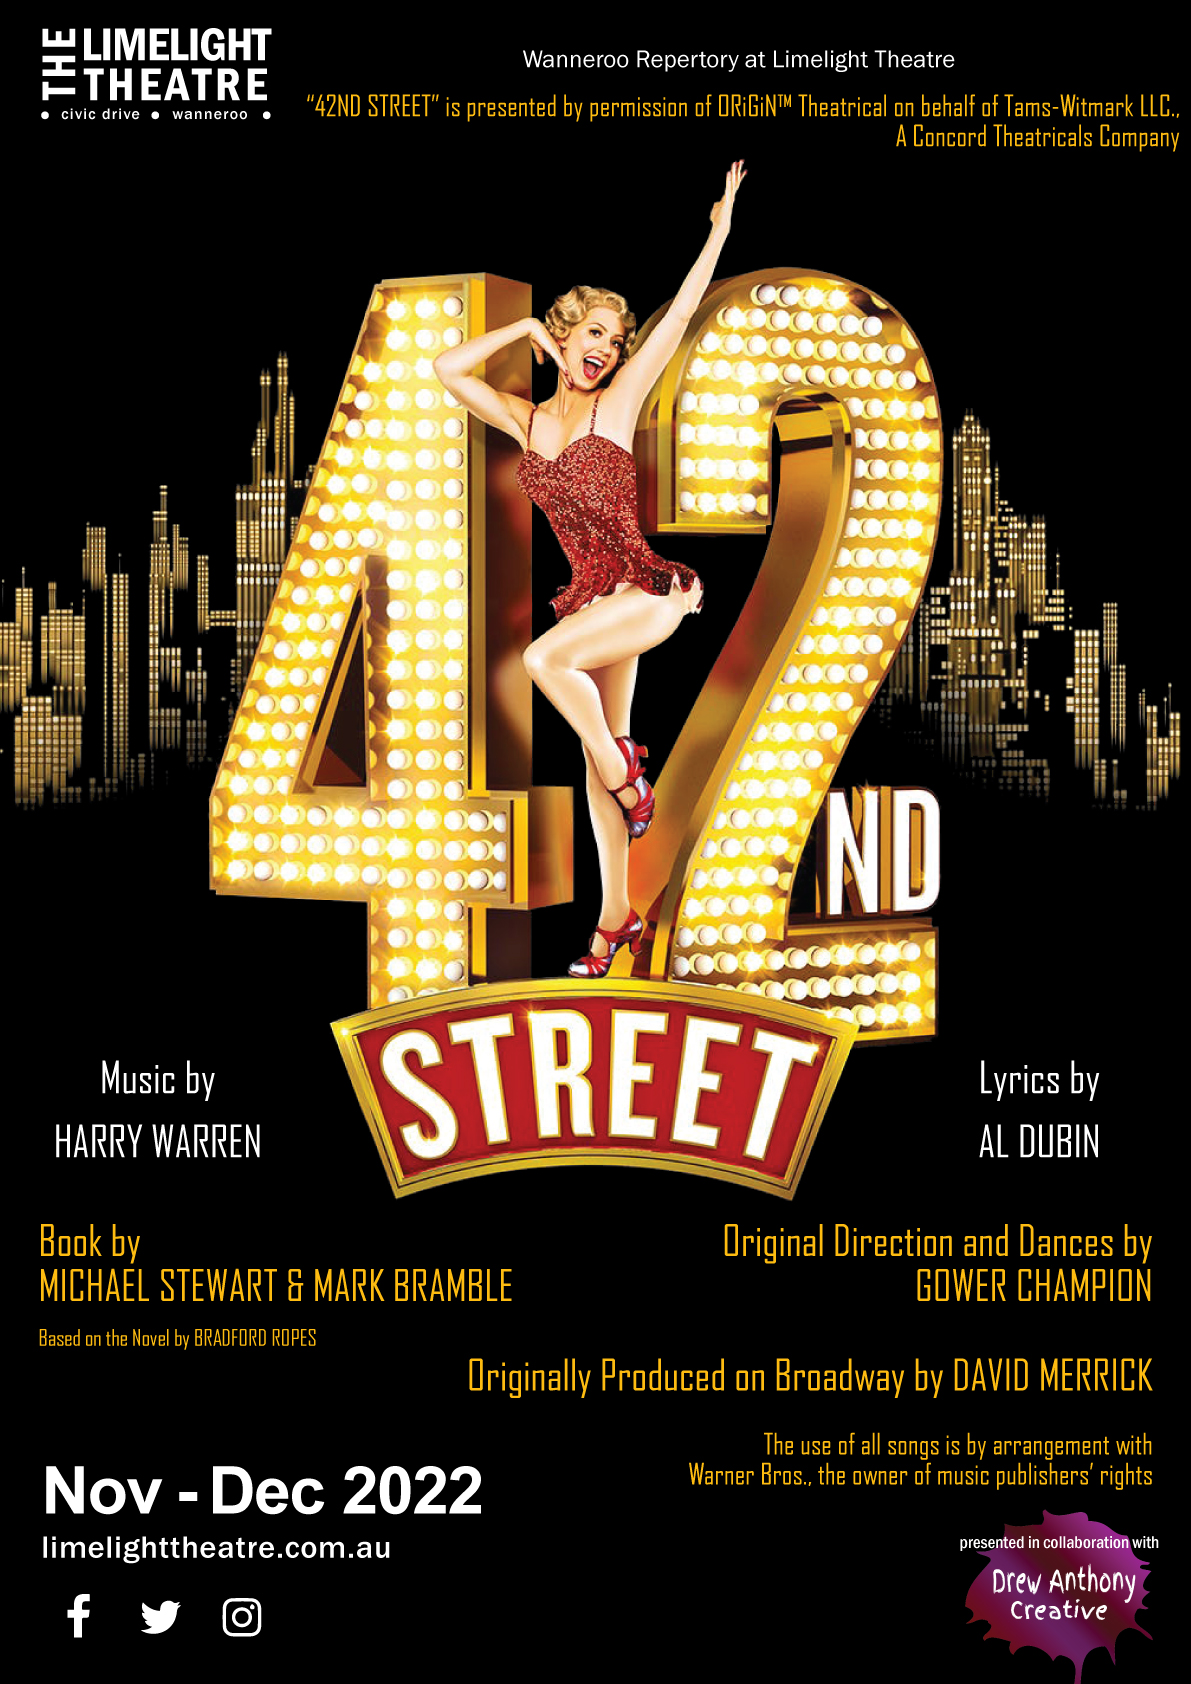 Poster showing dates of the performance of 42nd Street